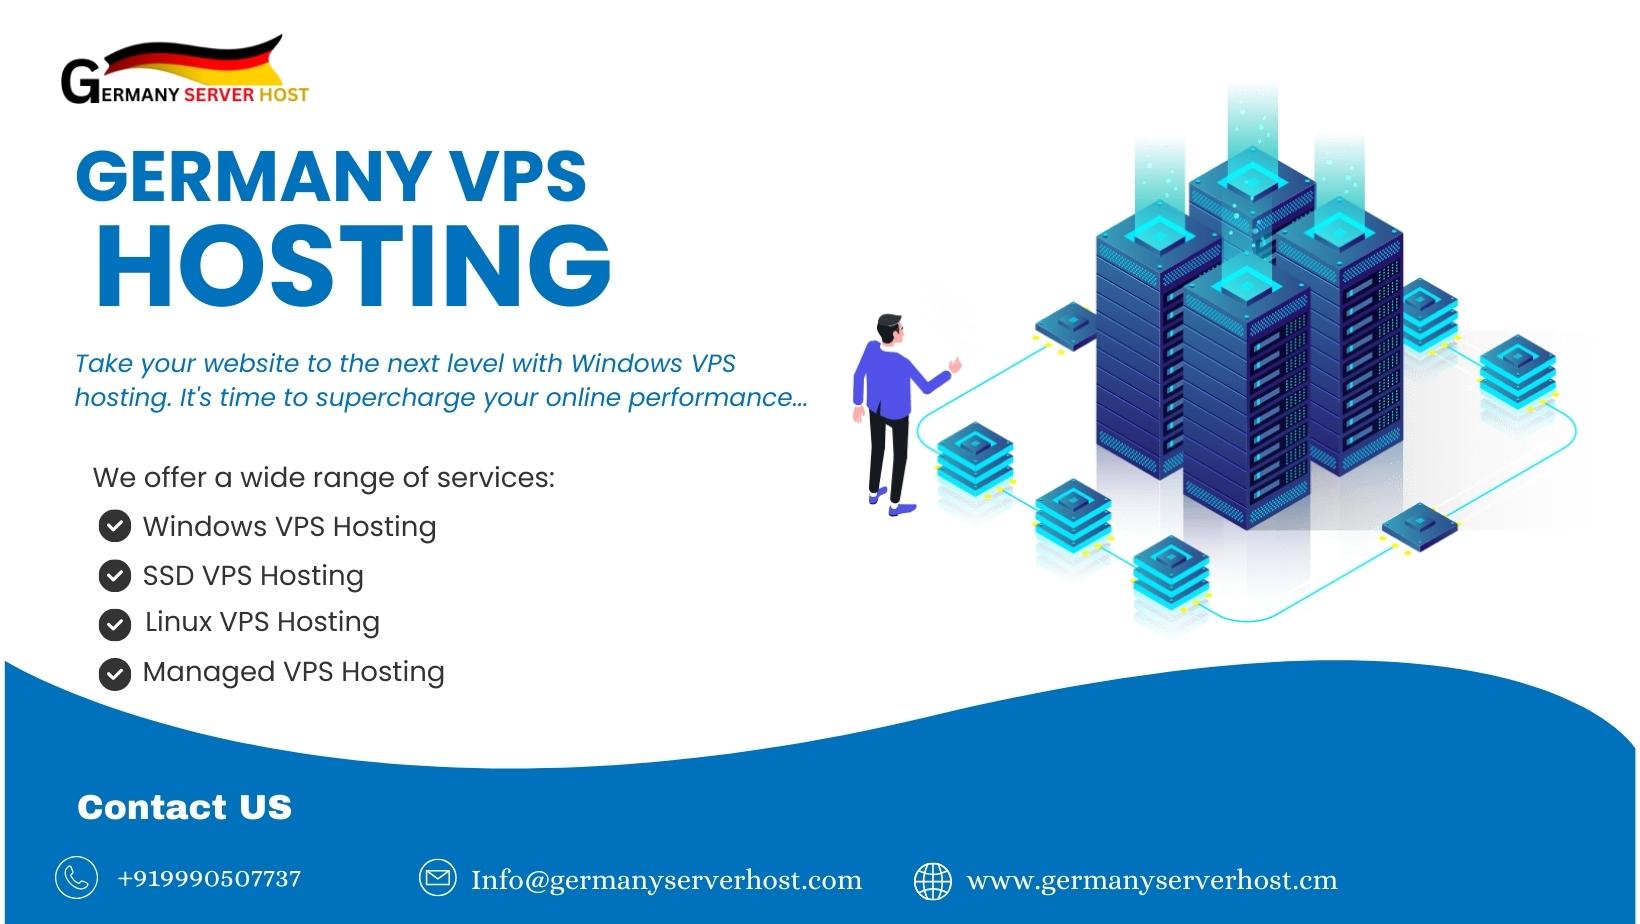 Germany VPS Hosting allows you to scale your resources as your website or application grows. You can easily upgrade your plan to accommodate increased traffic and resource demands